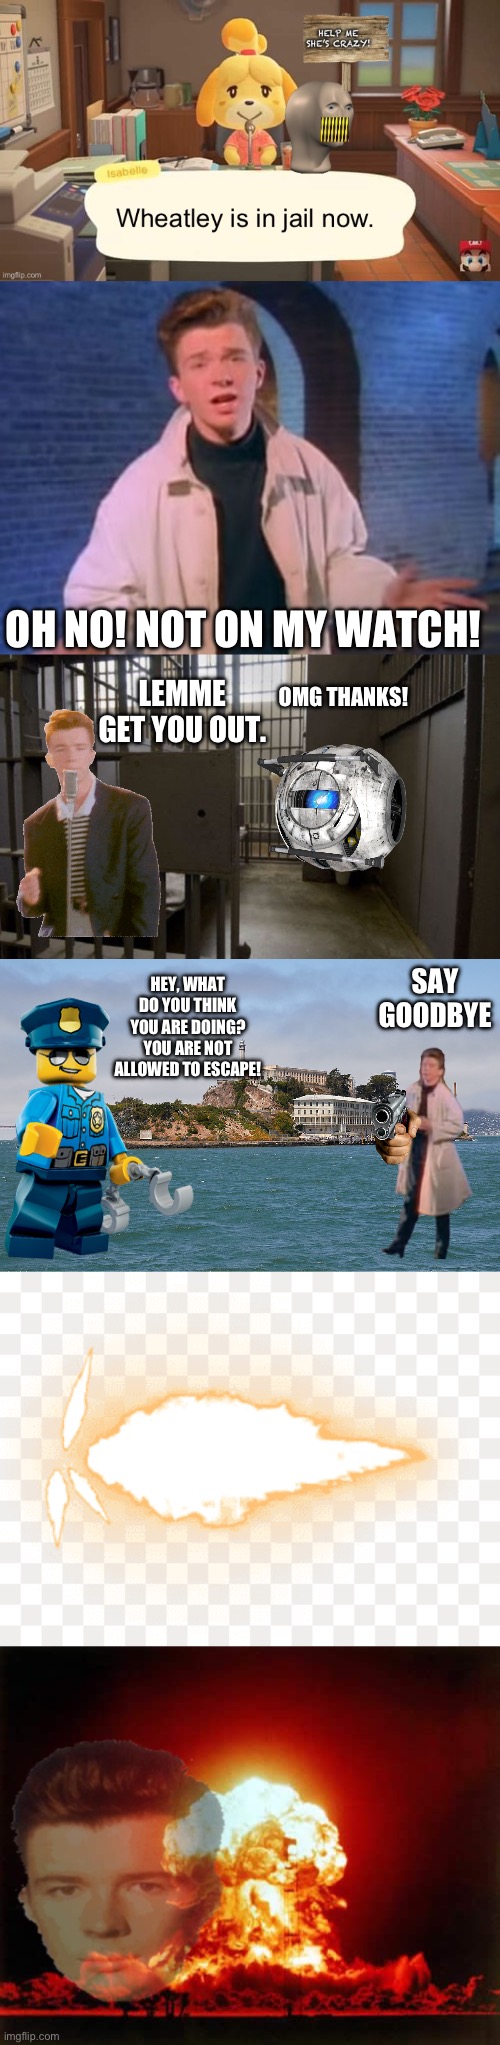 OH NO! NOT ON MY WATCH! LEMME GET YOU OUT. OMG THANKS! SAY GOODBYE; HEY, WHAT DO YOU THINK YOU ARE DOING? YOU ARE NOT ALLOWED TO ESCAPE! | image tagged in rick astley never gonna let you down,jail cell,alcatraz,gunshot,memes,nuclear explosion | made w/ Imgflip meme maker